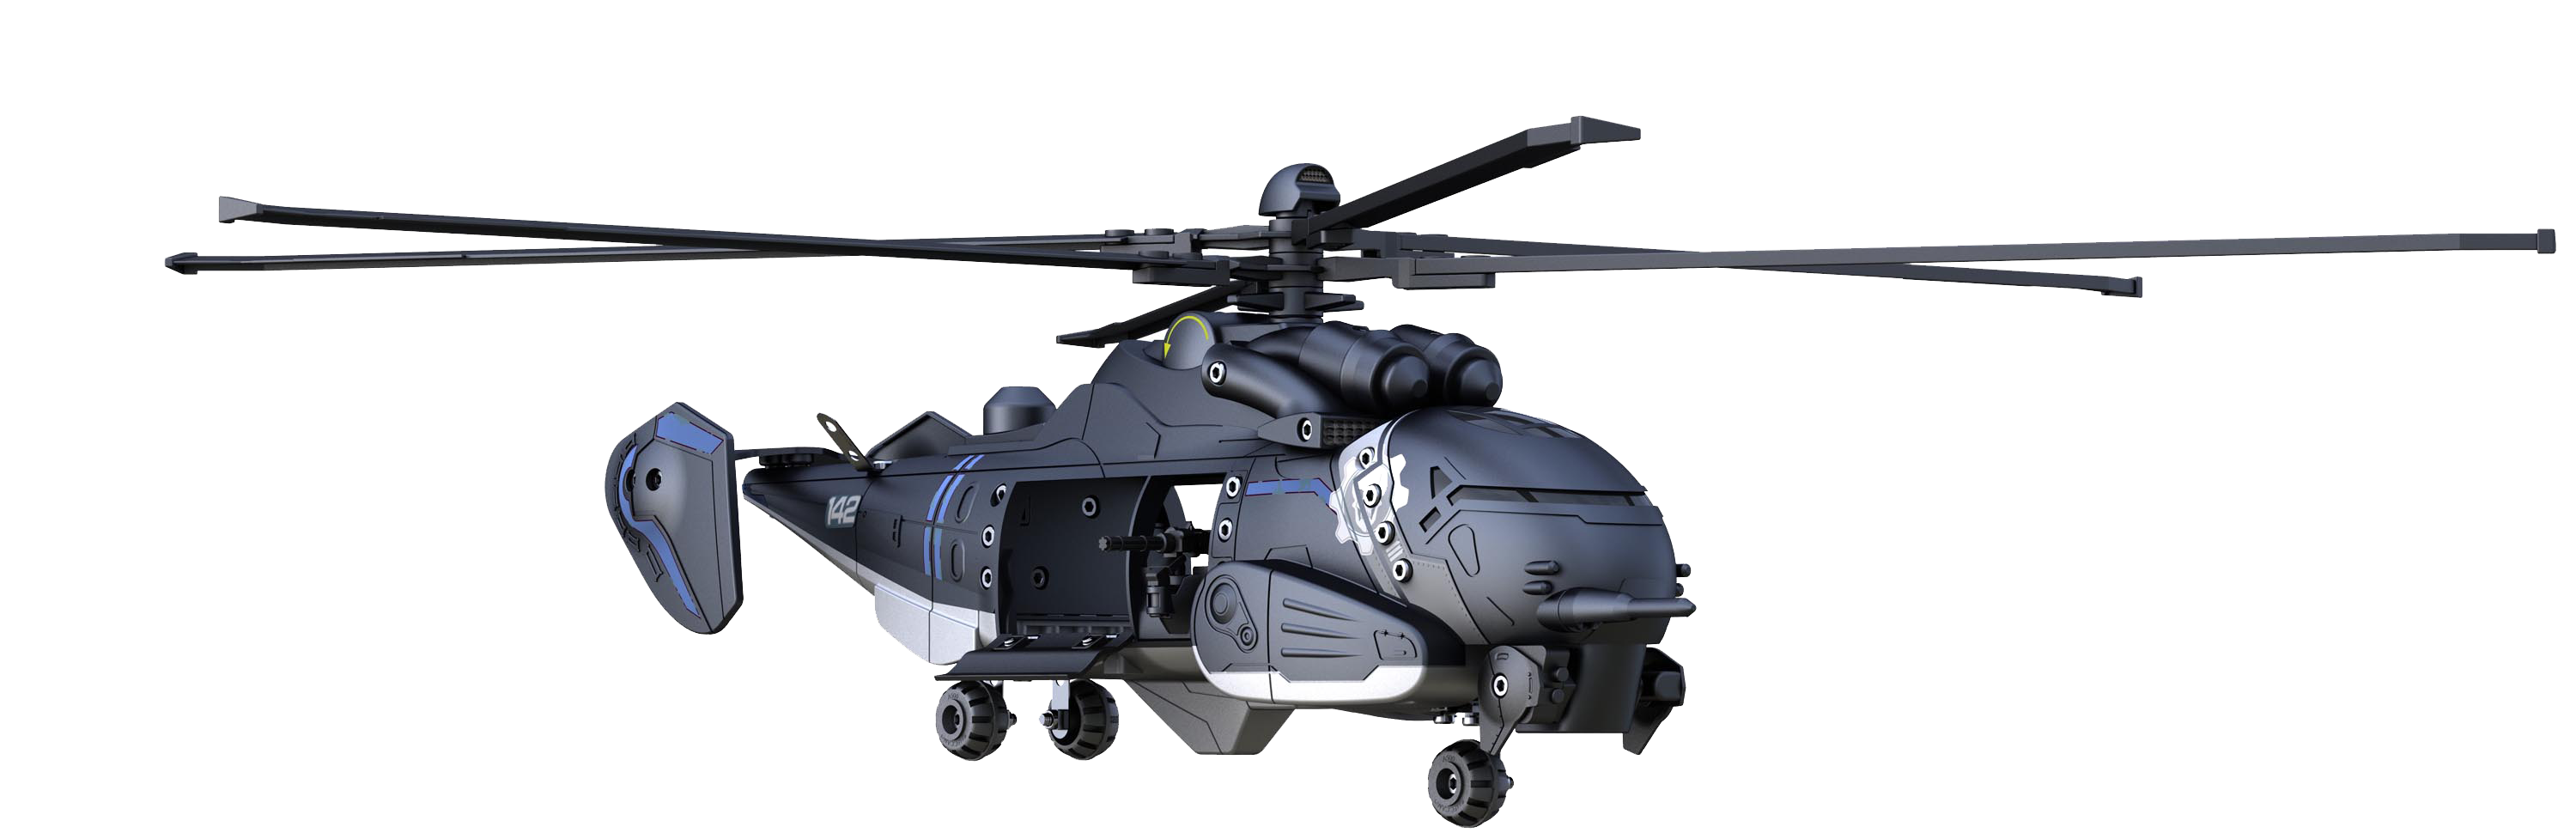 Army Helicopter PNG Transparent Images | PNG All